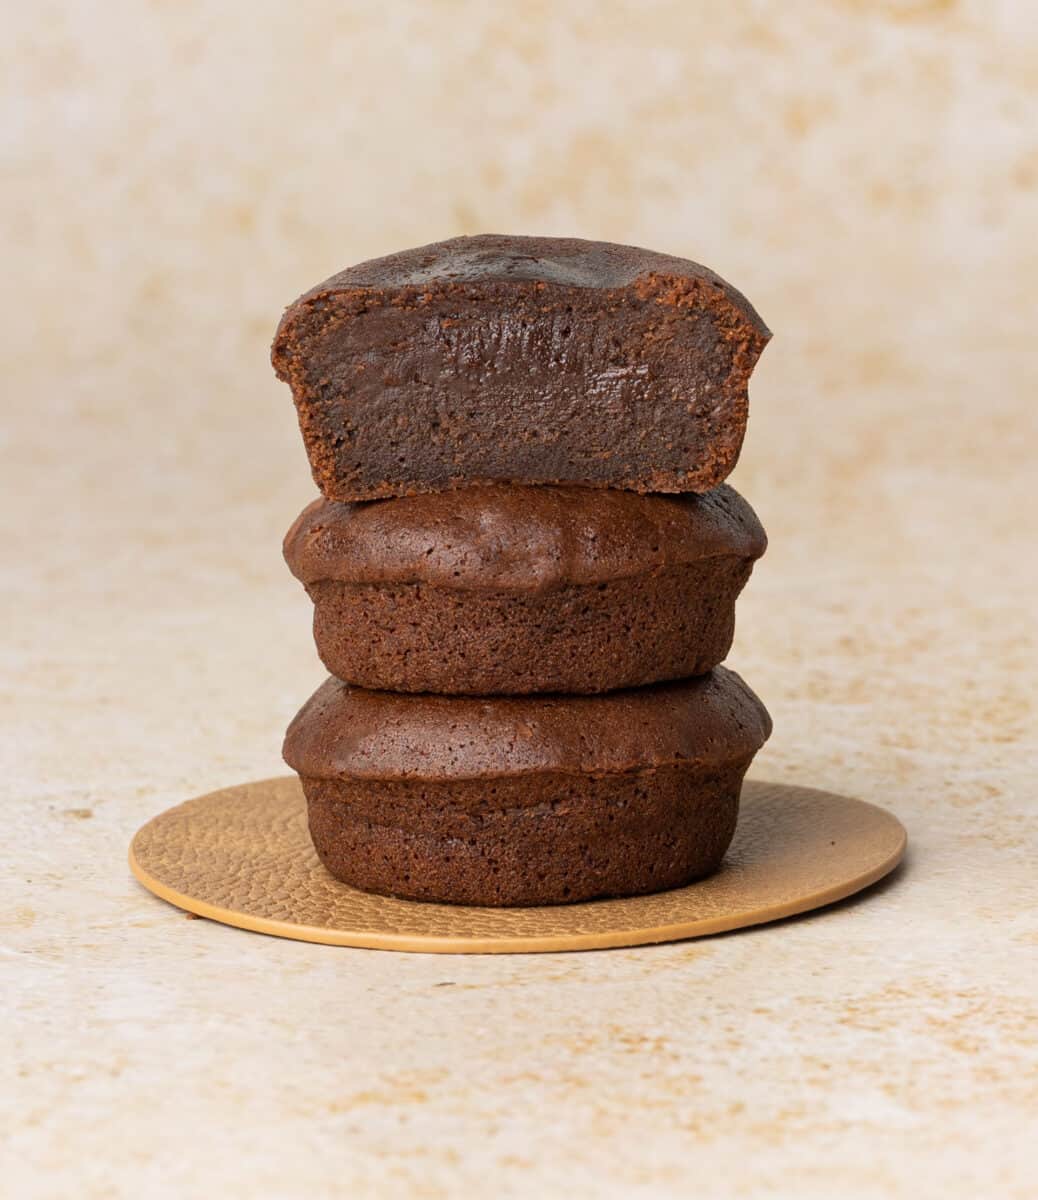 Stack of three chocolate cakes with the top one sliced in half.